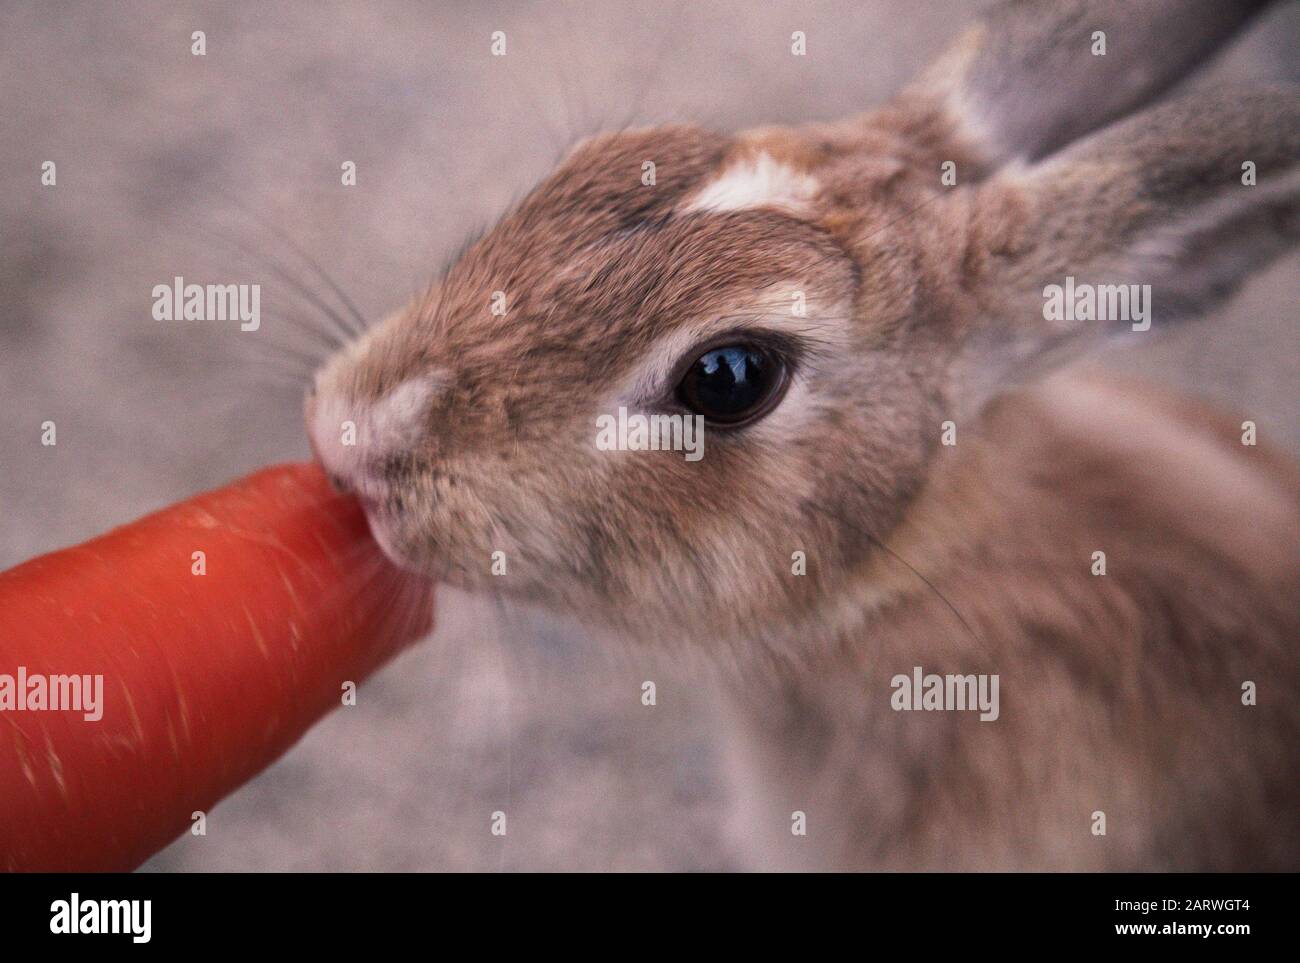 Closeup shot of a rabbit eating a carrot with blurred background Stock Photo